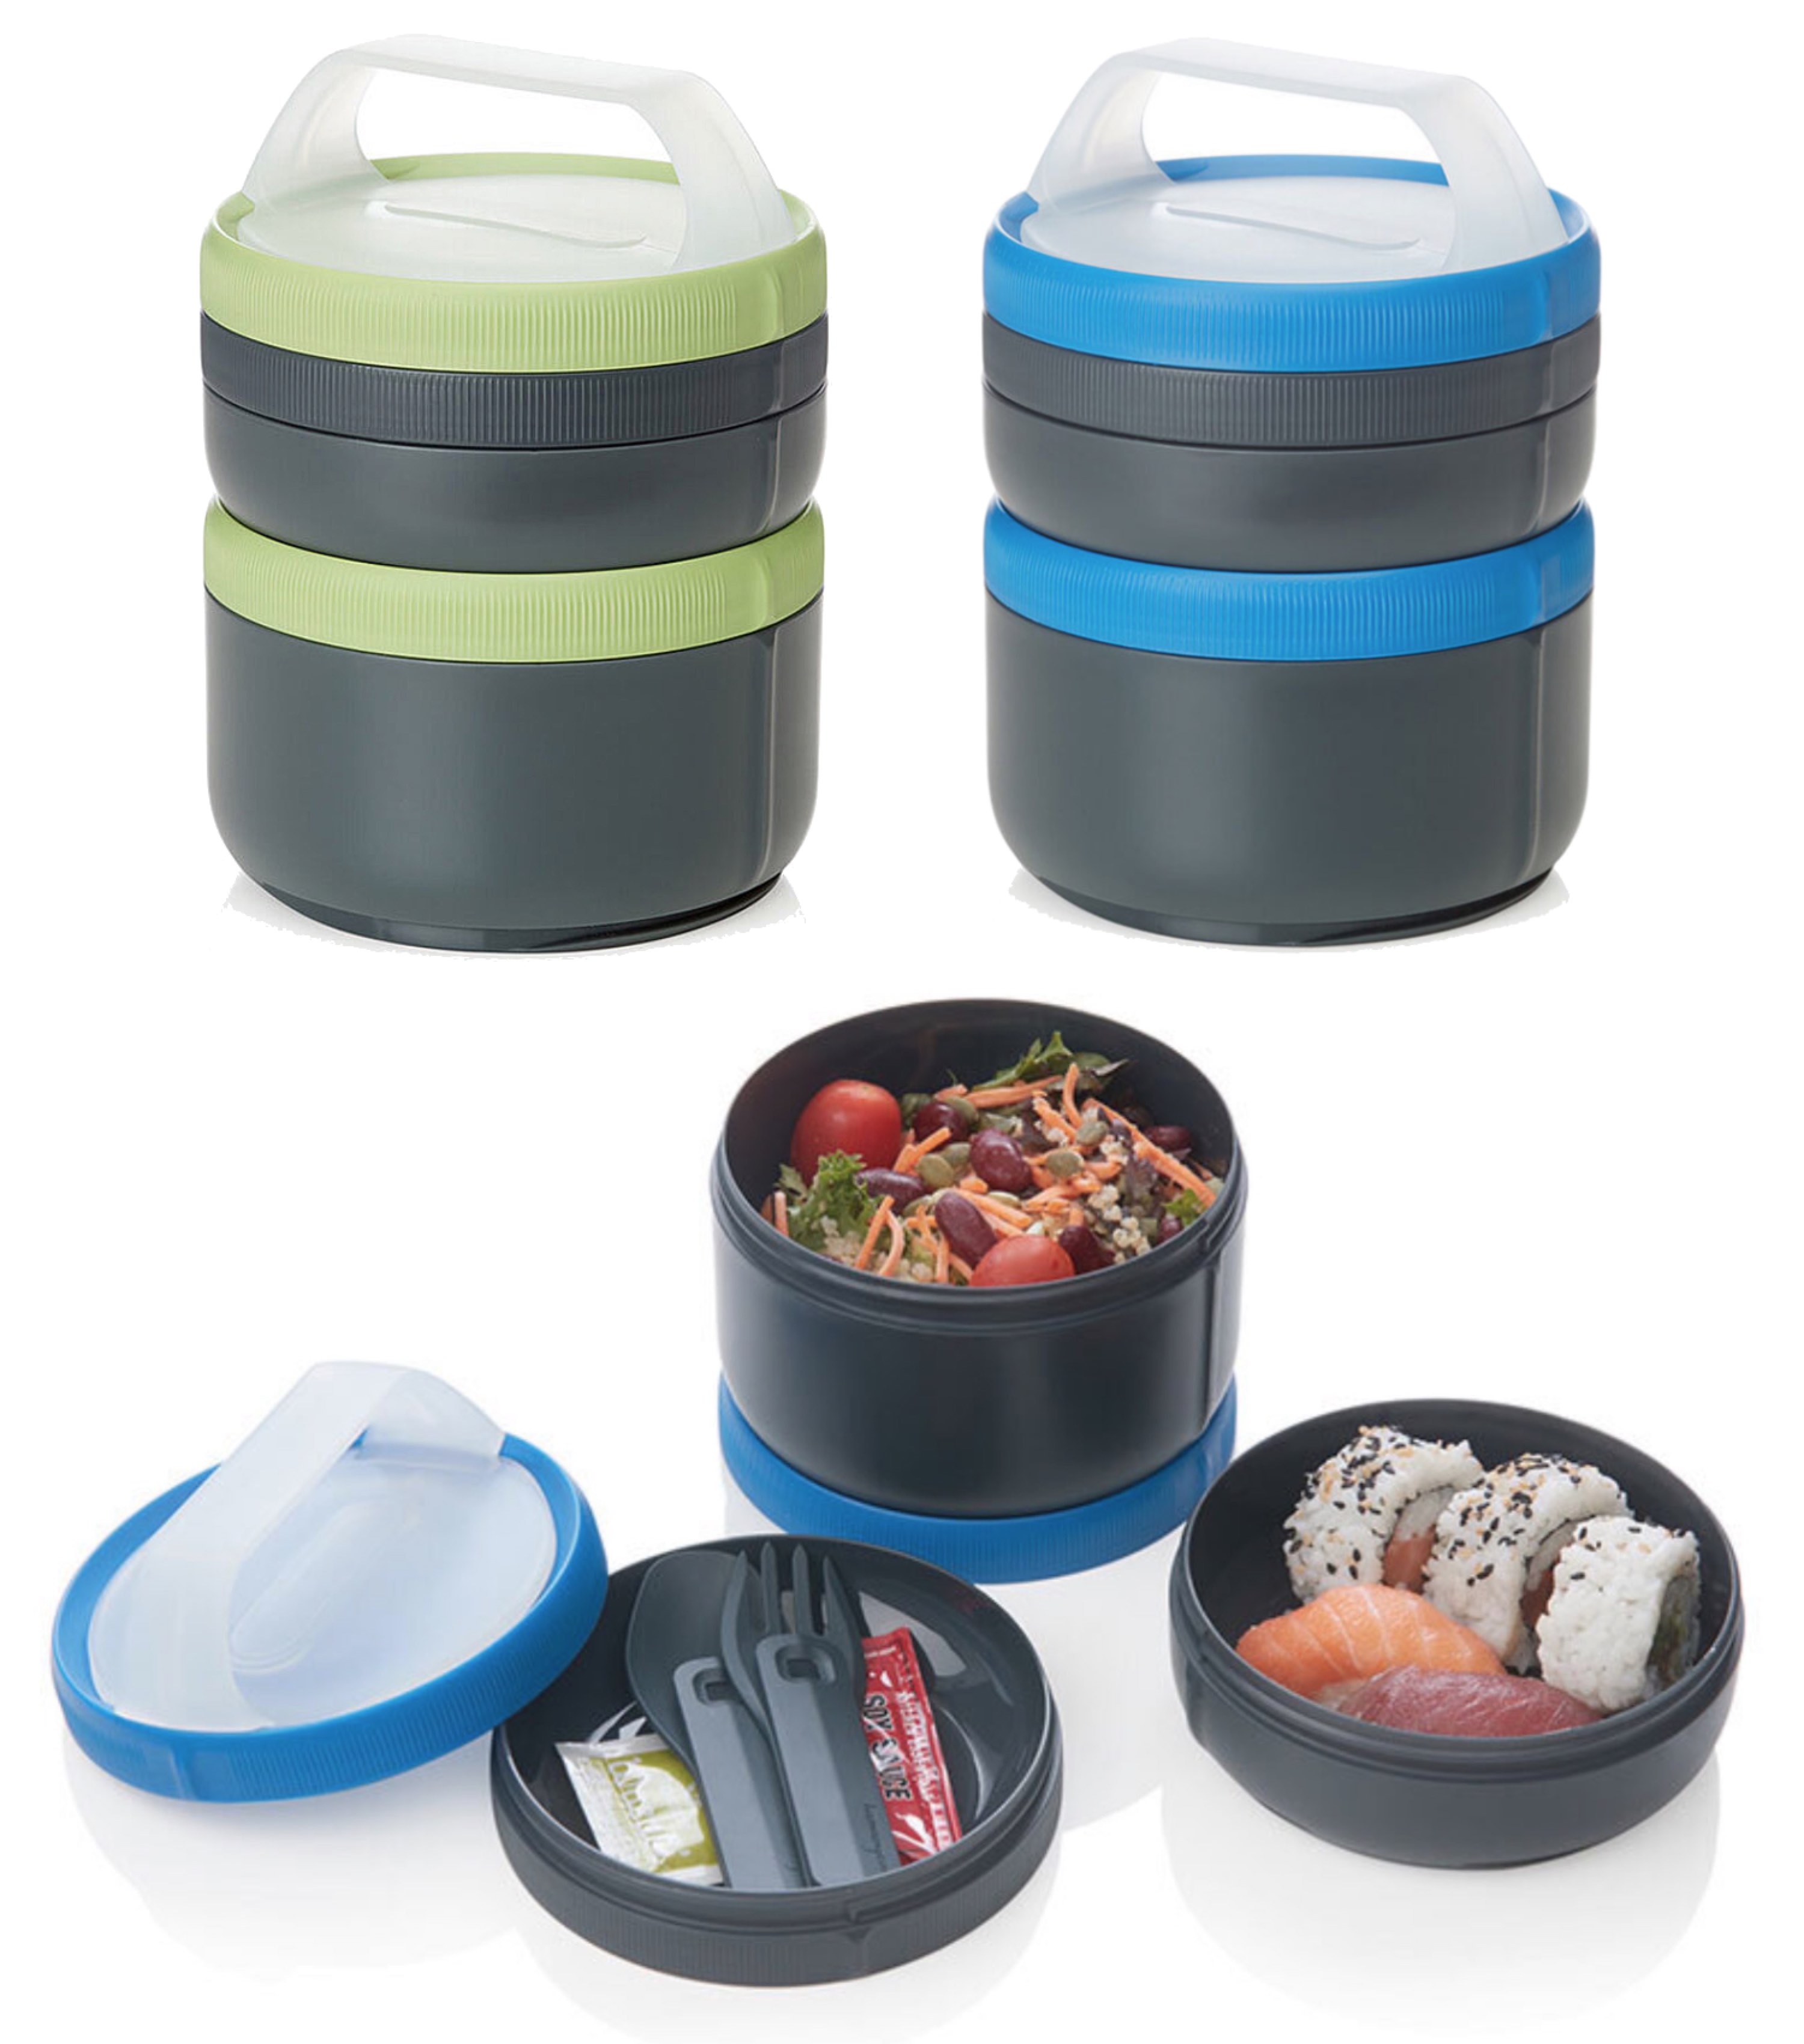 http://www.traveluniverse.com.au/Shared/Images/Product/Humangear-Stax-XL-EatSystem-Food-Containers/HG0831-group.jpg